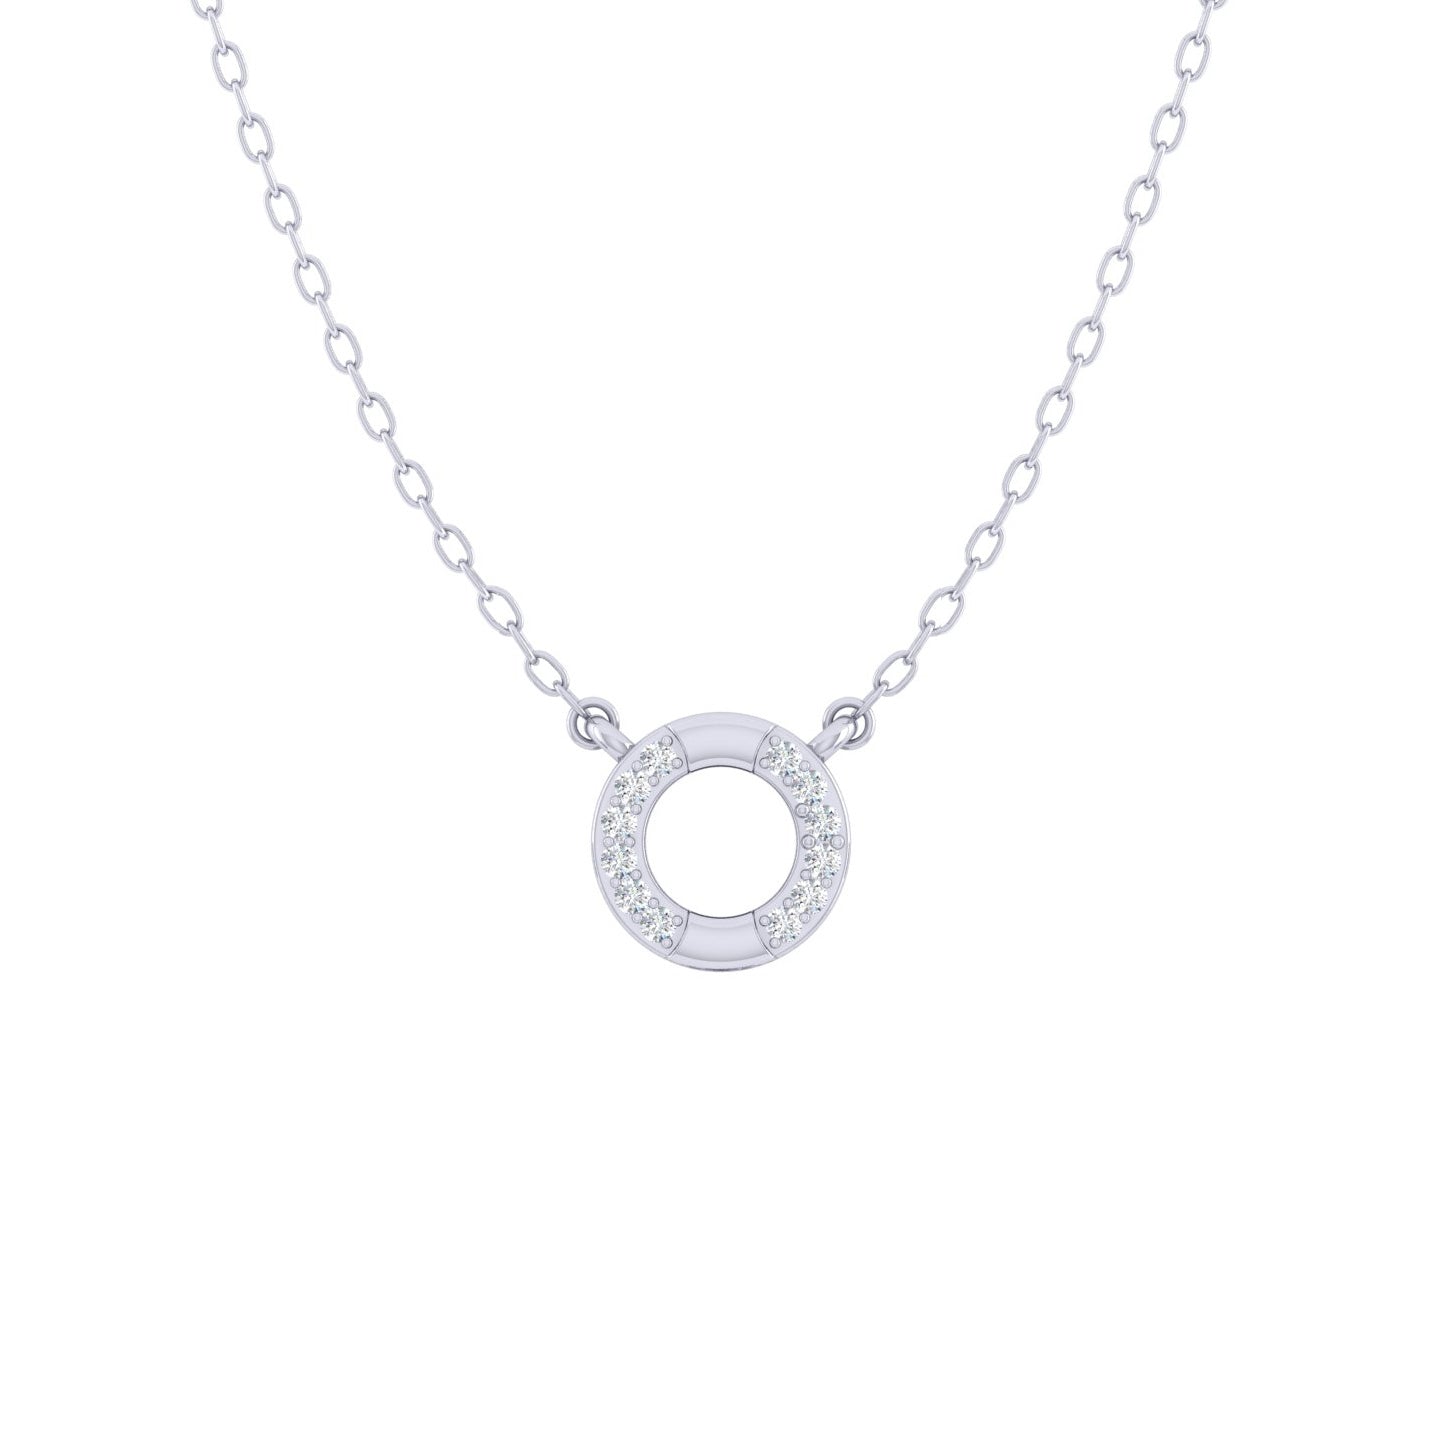 Karma Circle 1/20 Cttw Natural Diamond Pendant Necklace set in 925 Sterling Silver